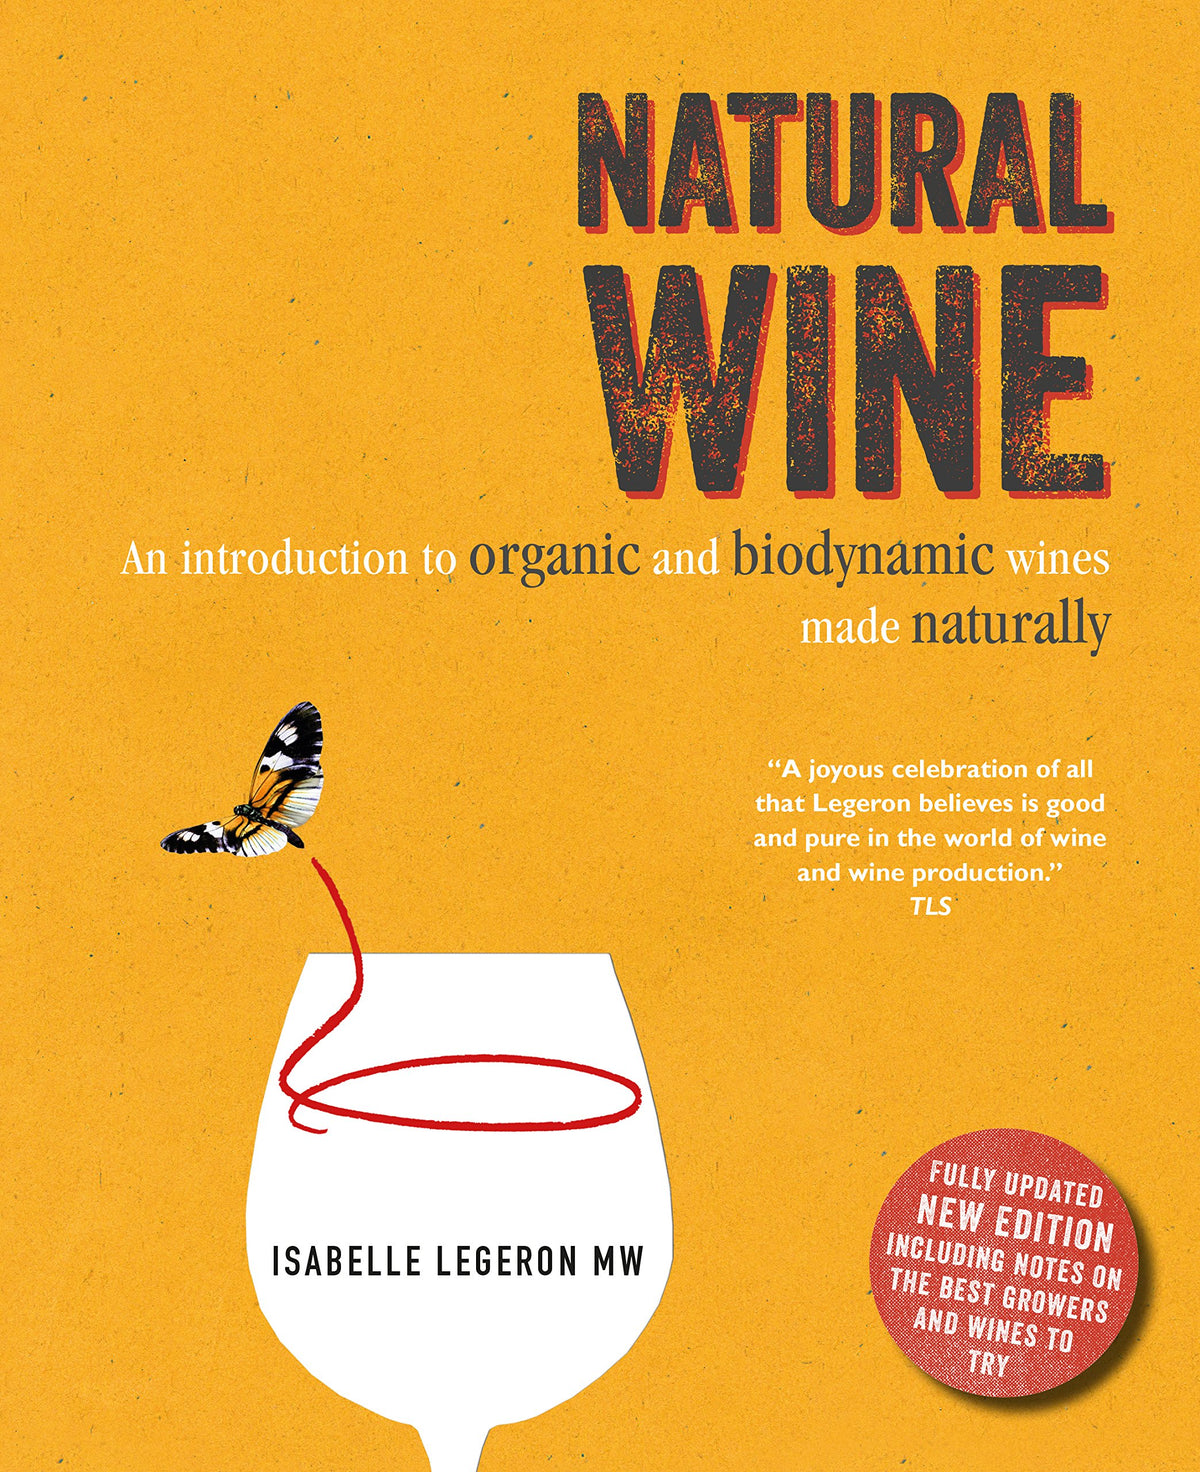 Natural Wine - All Things Fermented | Home Brew Shop NZ | Supplies | Equipment